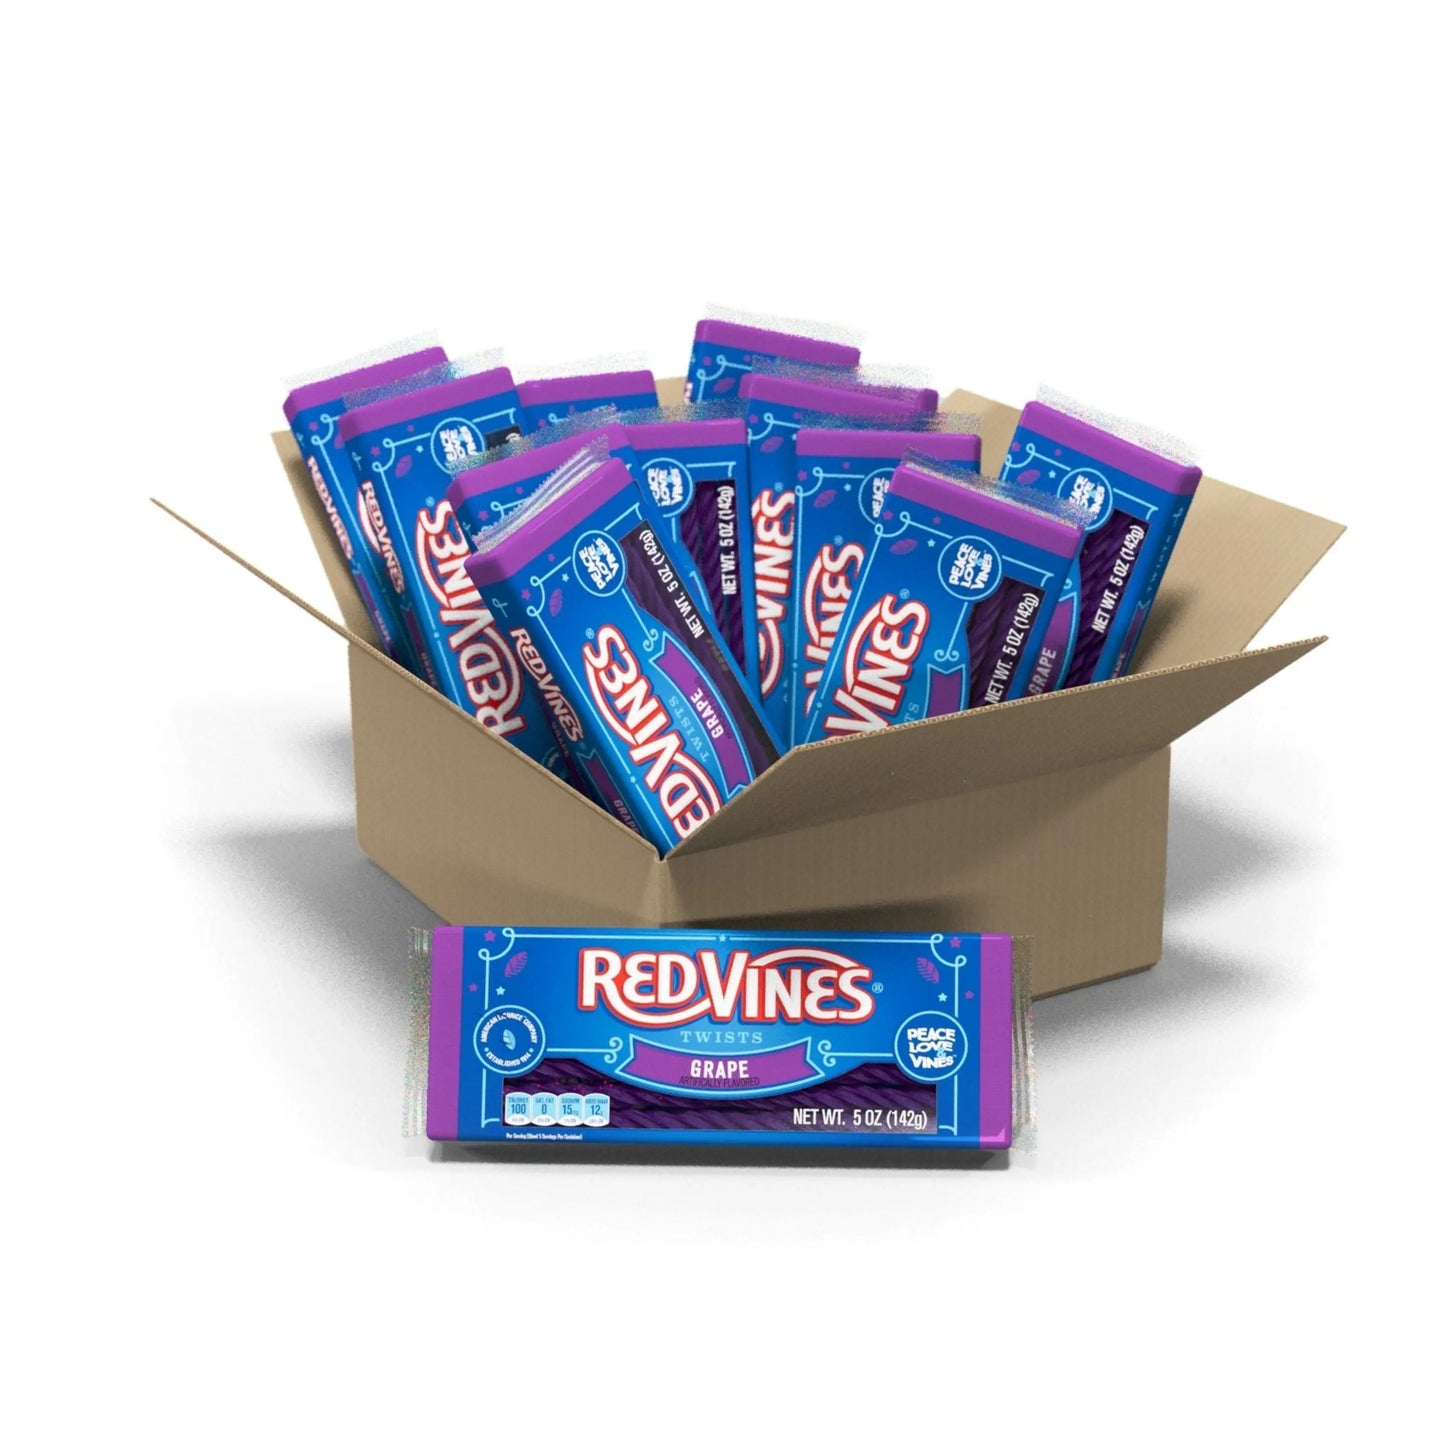 12 count box of RED VINES Grape Licorice Twists 5oz trays